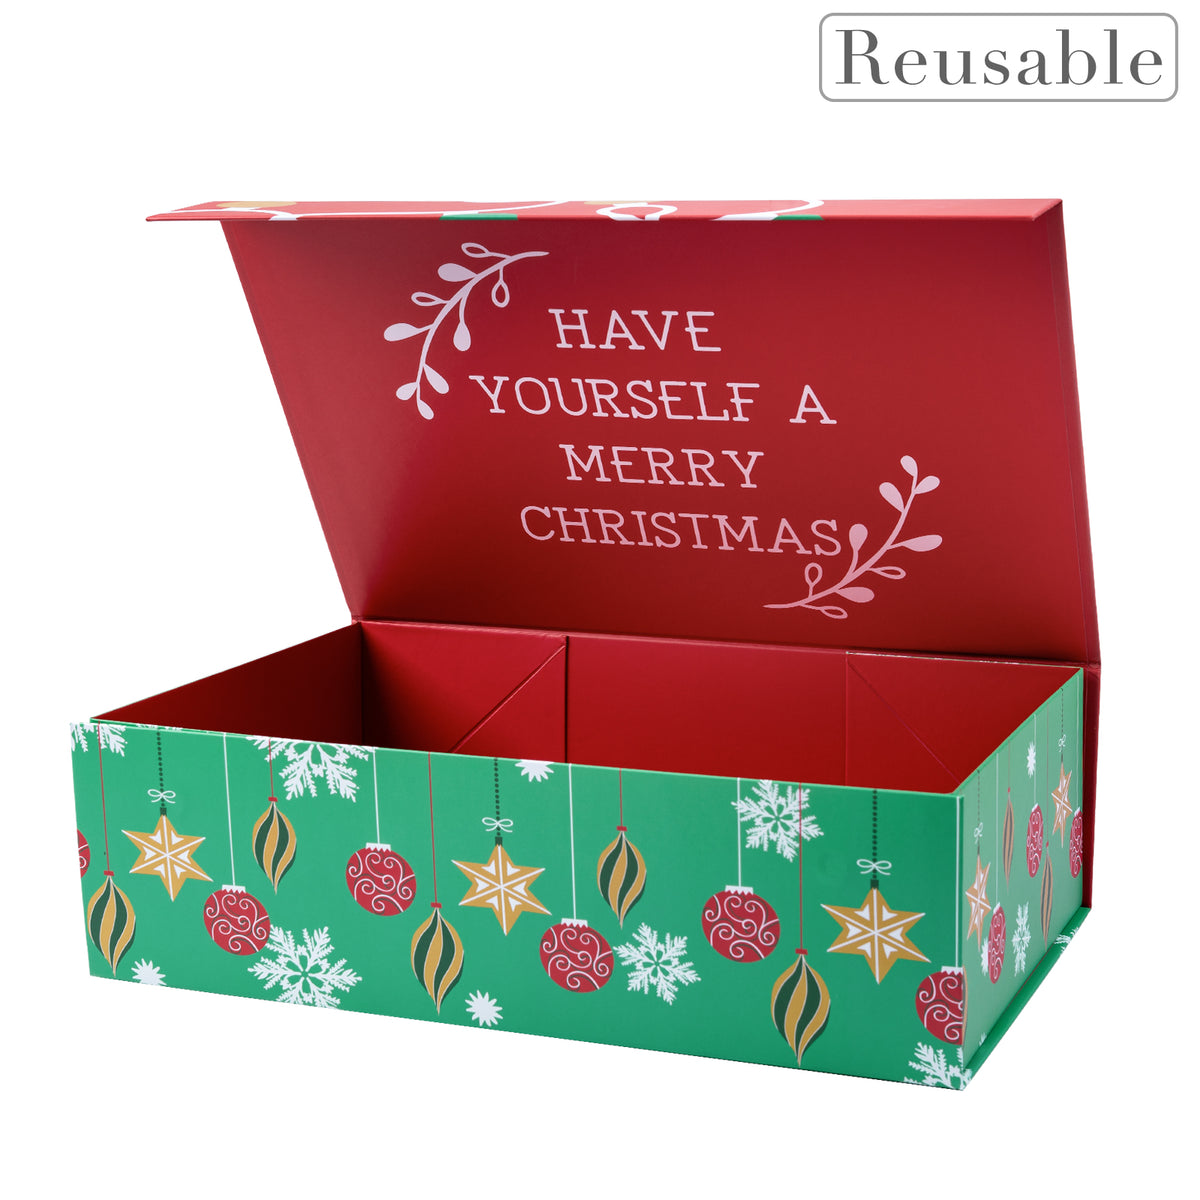  WRAPAHOLIC 1 Pcs Christmas Gift Box with Lid - 14x9x4.3 Inches  Black and Gold Stripe Design Gift Box, Collapsible Gift Box with Magnetic  Closure and 2 Pcs Tissue Paper : Health & Household